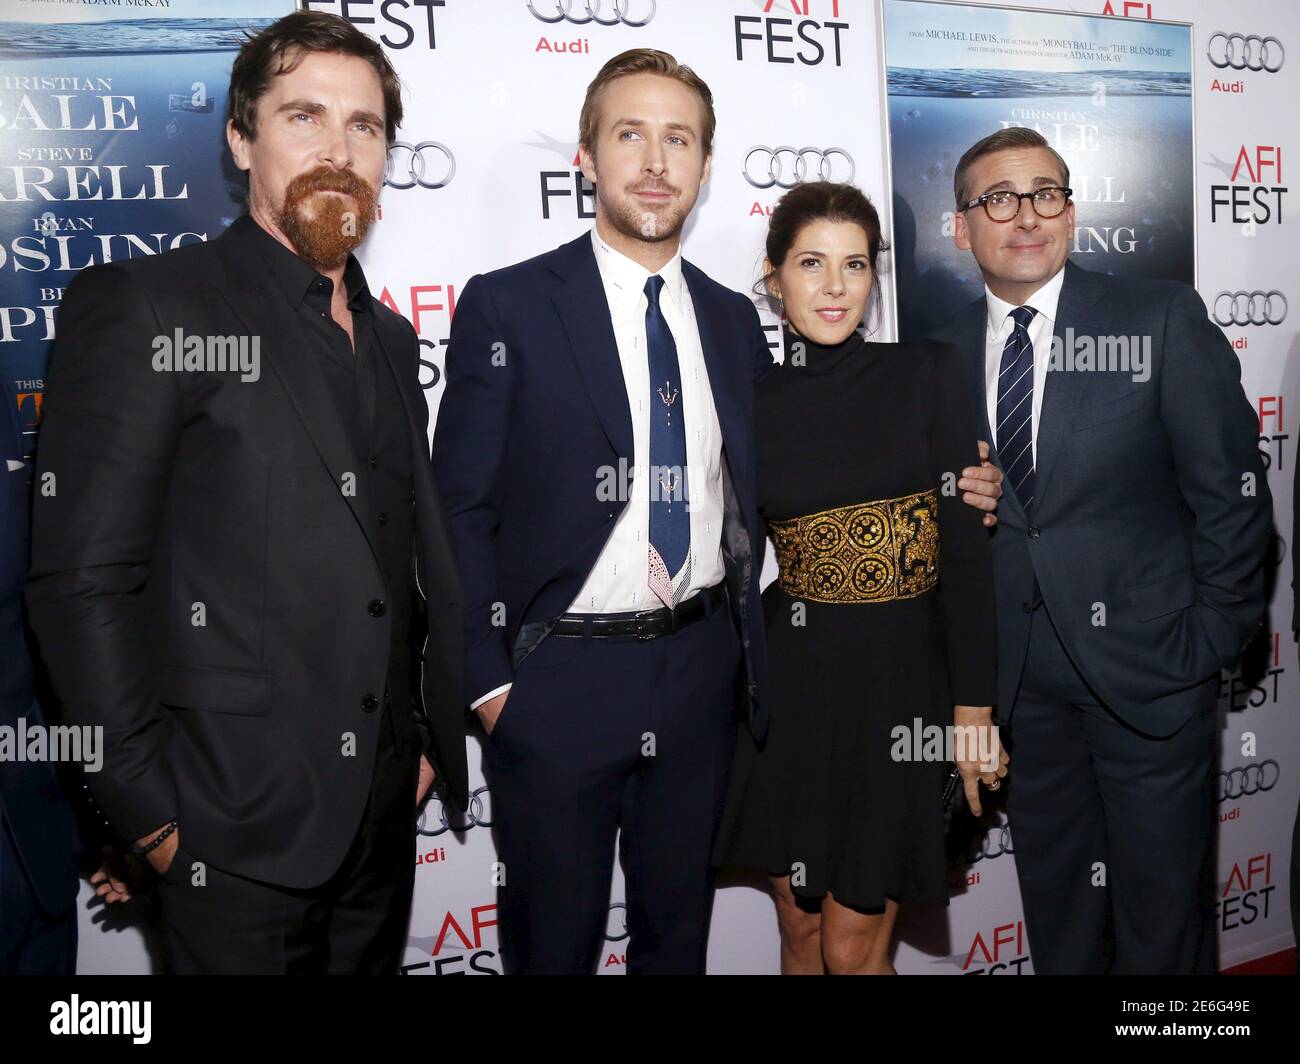 Cast members (L-R) Christian Bale, Ryan Gosling, Marisa Tomei and Steve  Carell pose at the premiere of 